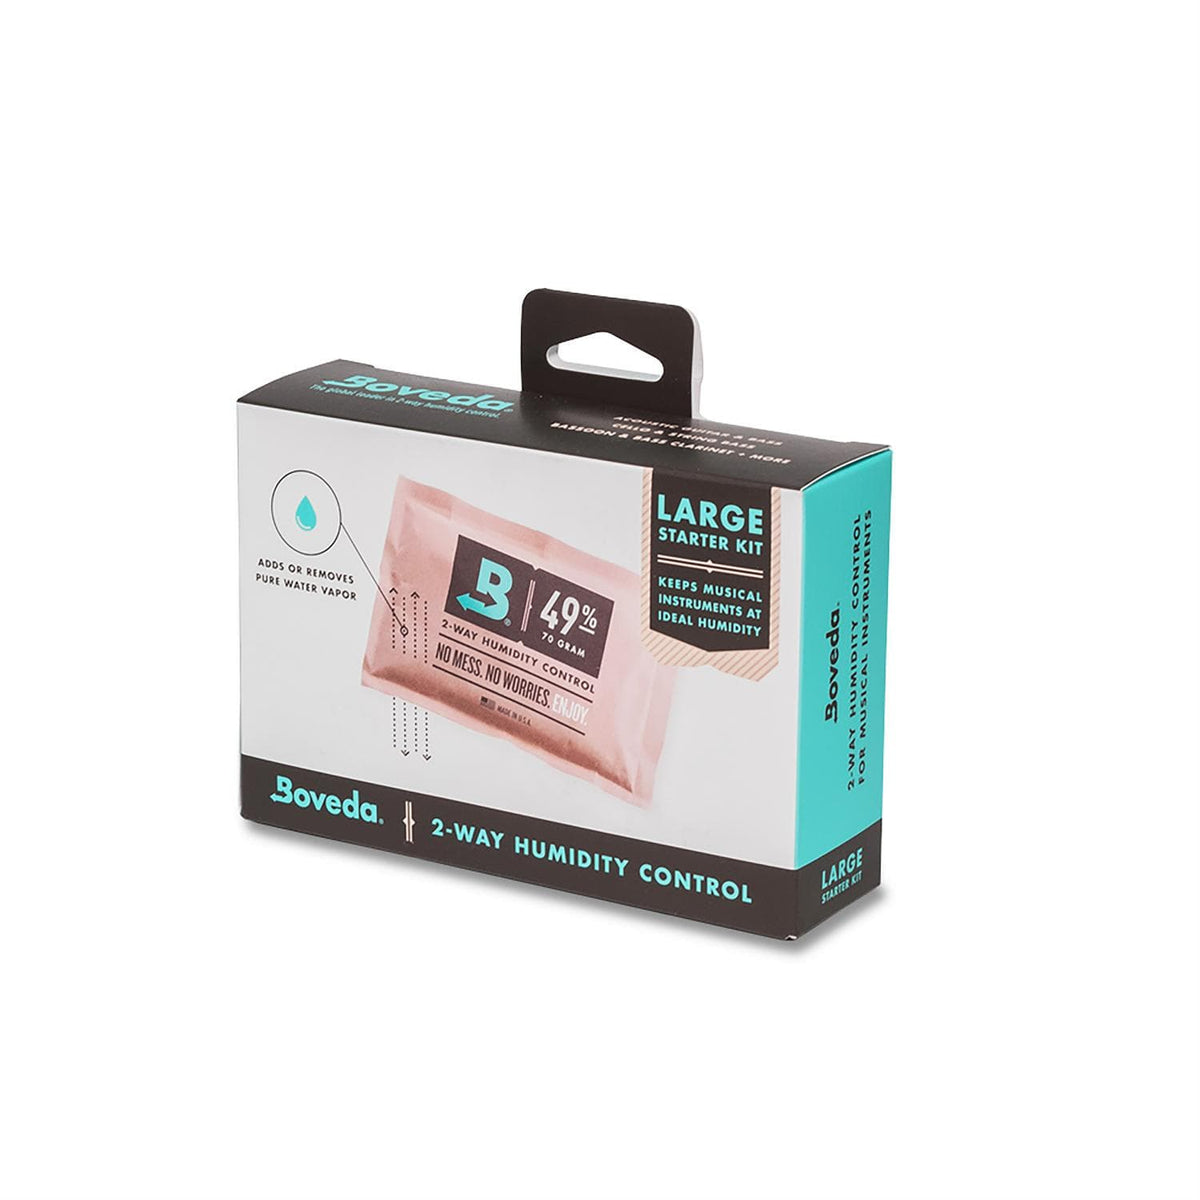 Boveda Humidification System for Cello and Bass